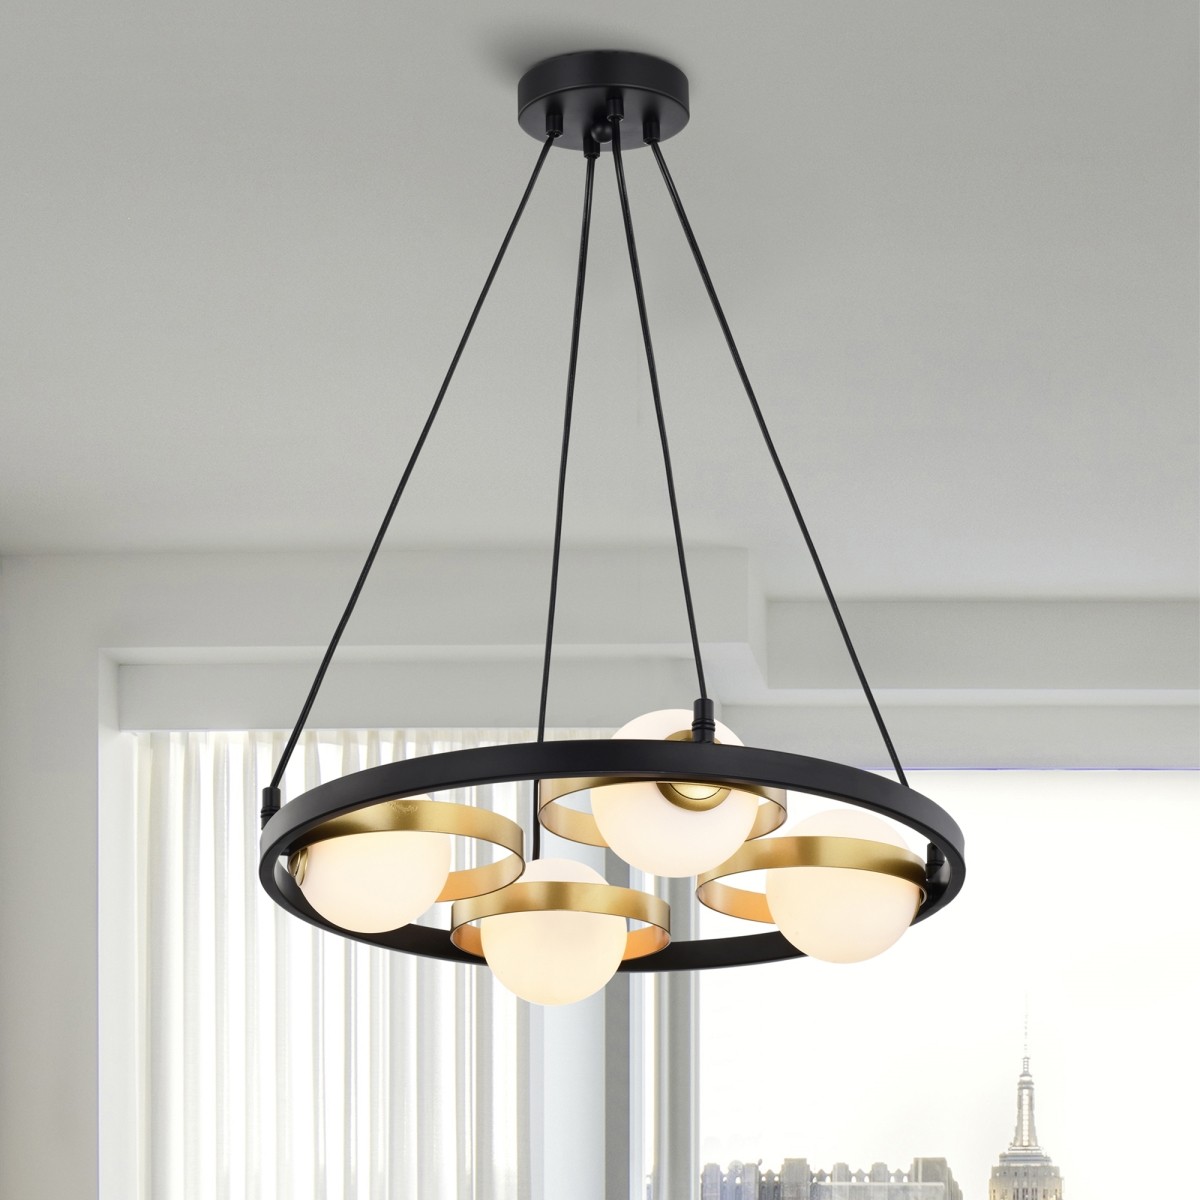 Pomponia 18 in. 4-Light Indoor Matte Black and Satin Gold Finish Chandelier with Light Kit